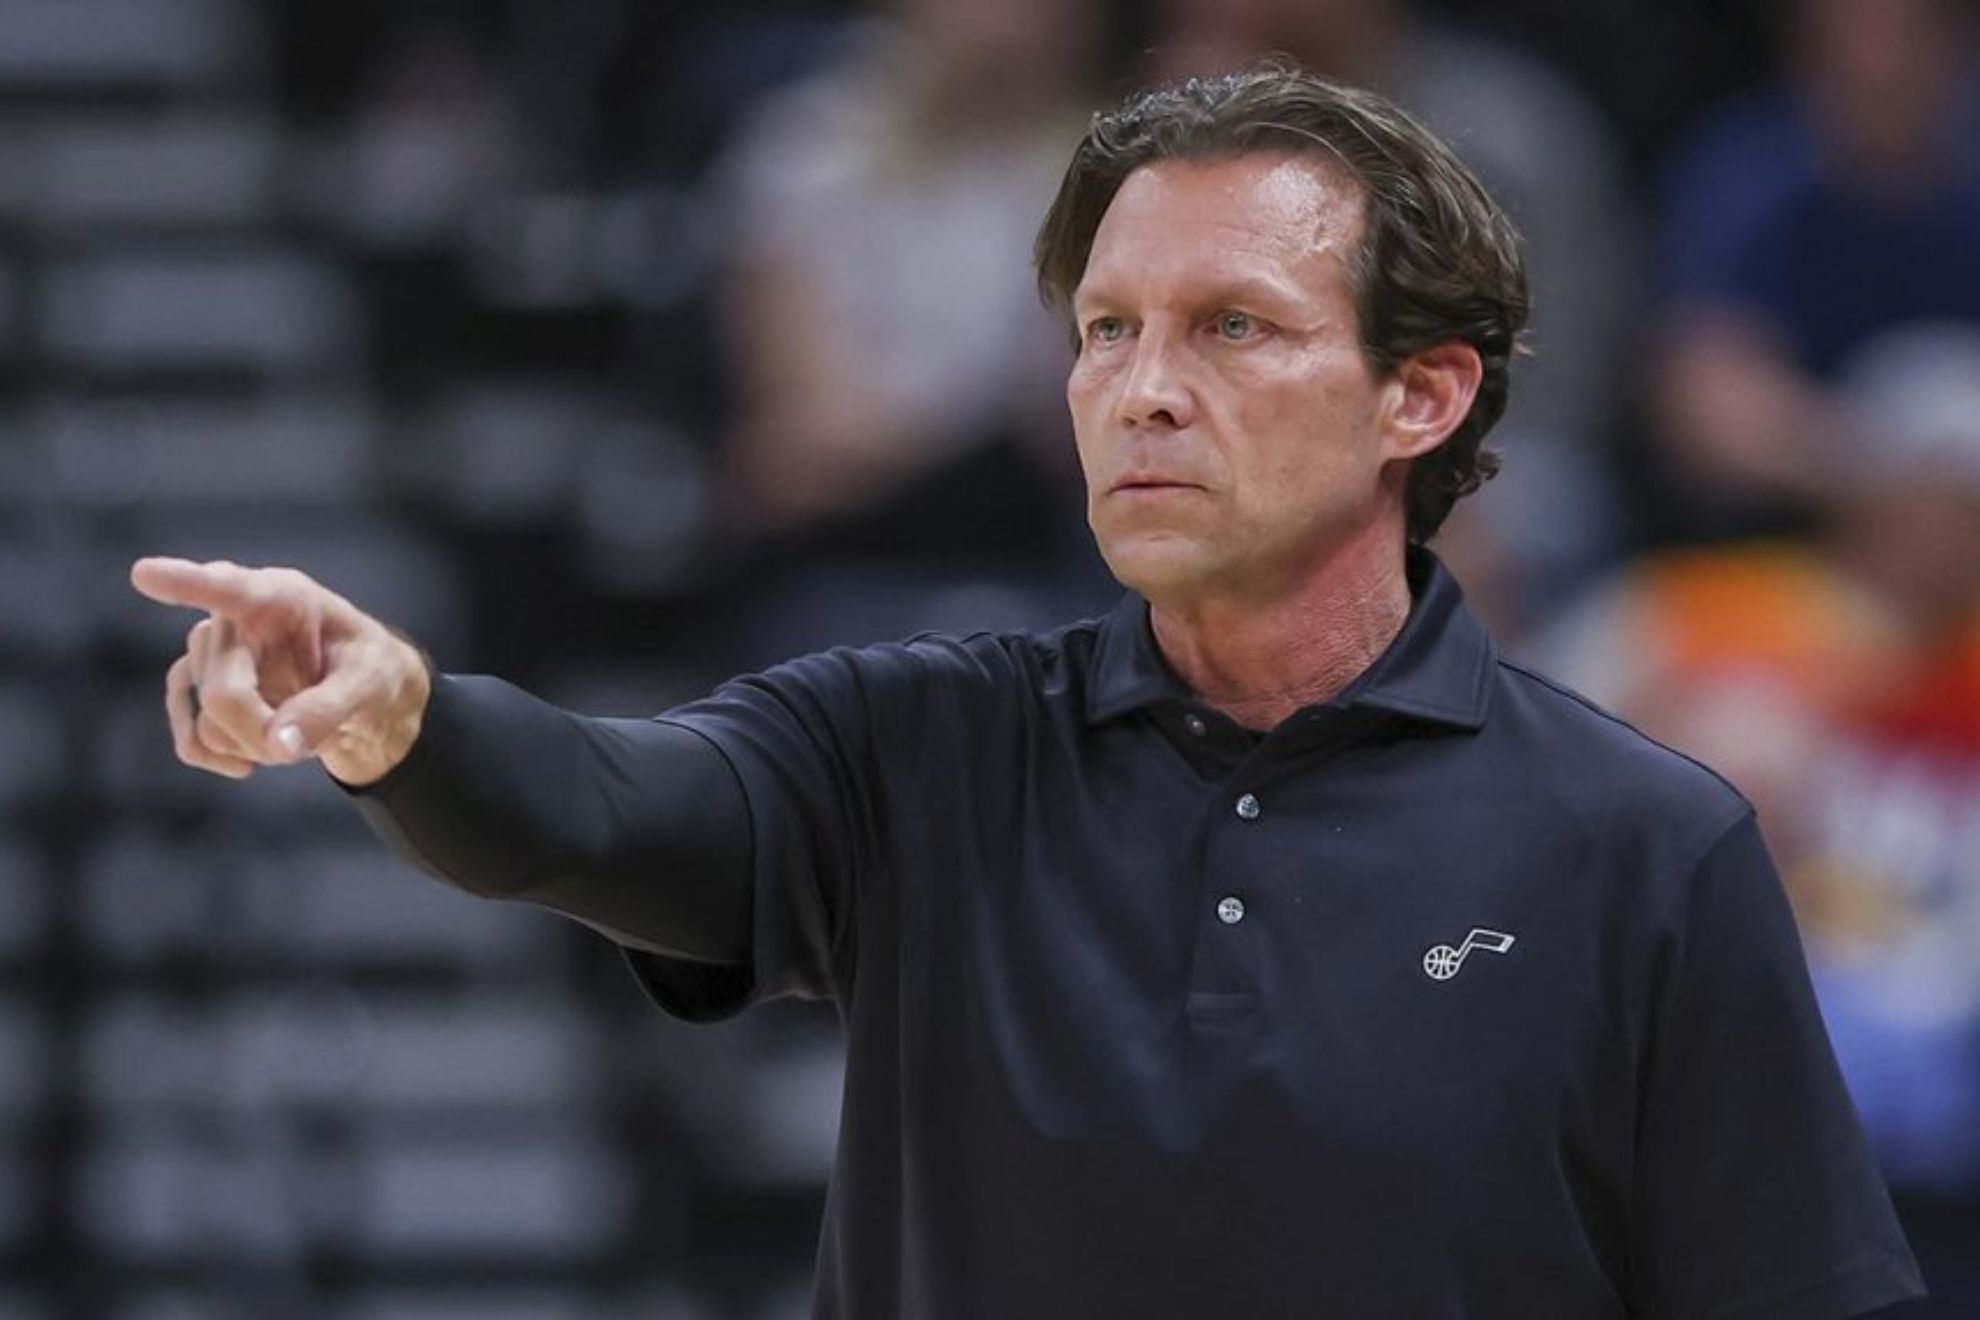 The Atlanta Hawks have announced Quin Snyder's signing as head coach on a 5-year deal.